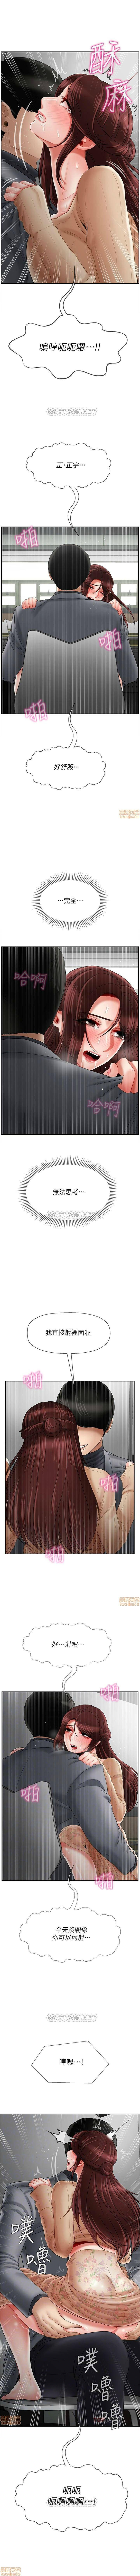 The 坏老师 | PHYSICAL CLASSROOM 25 [Chinese] Manhwa Cunnilingus - Page 3